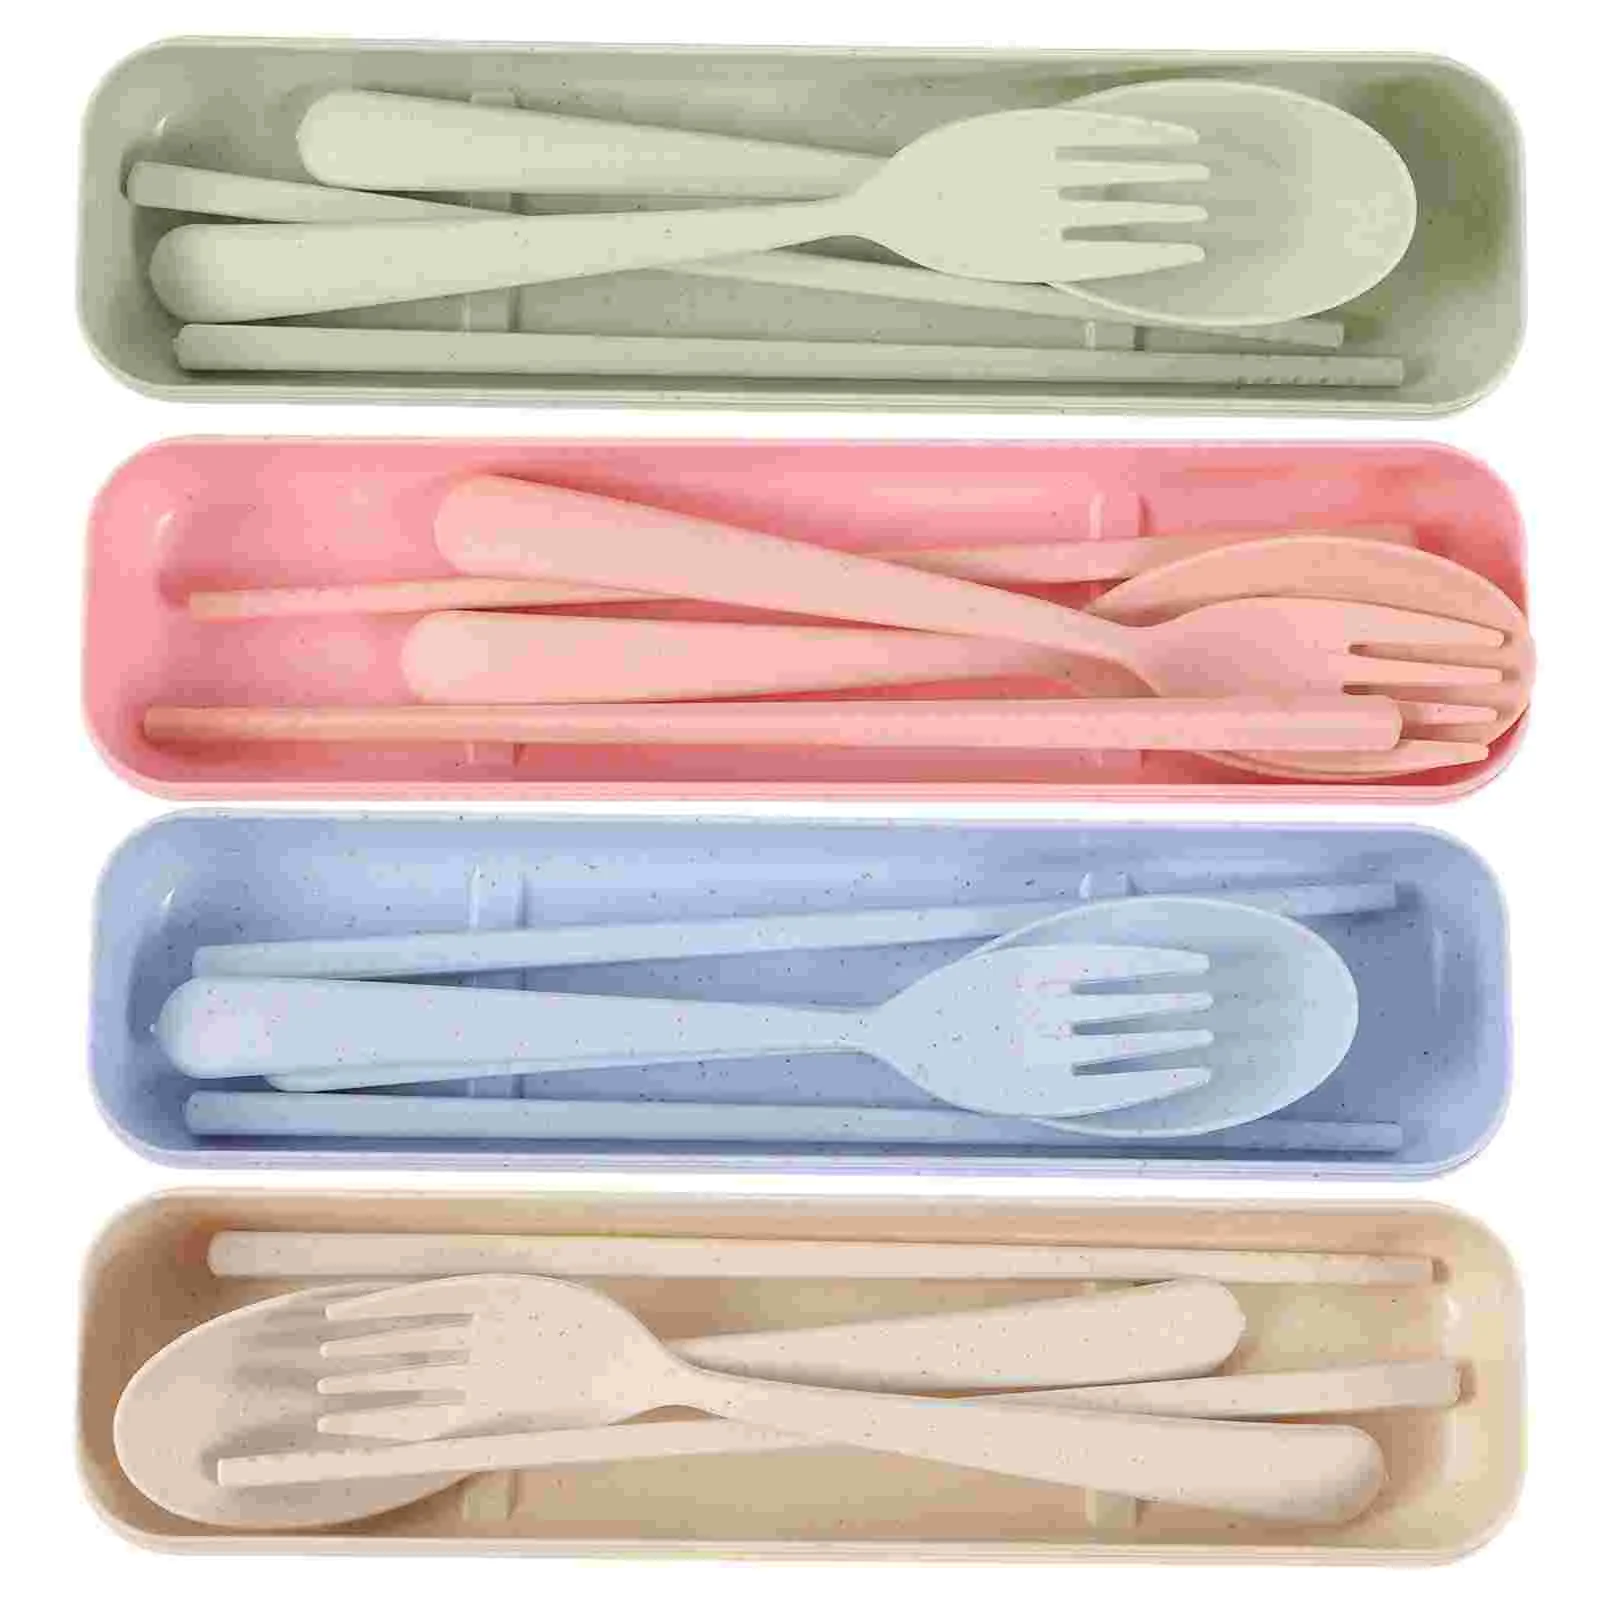 

4 Sets Portable Cutlery Camping Dishes & Utensils Tableware Pp Green Dinnerware